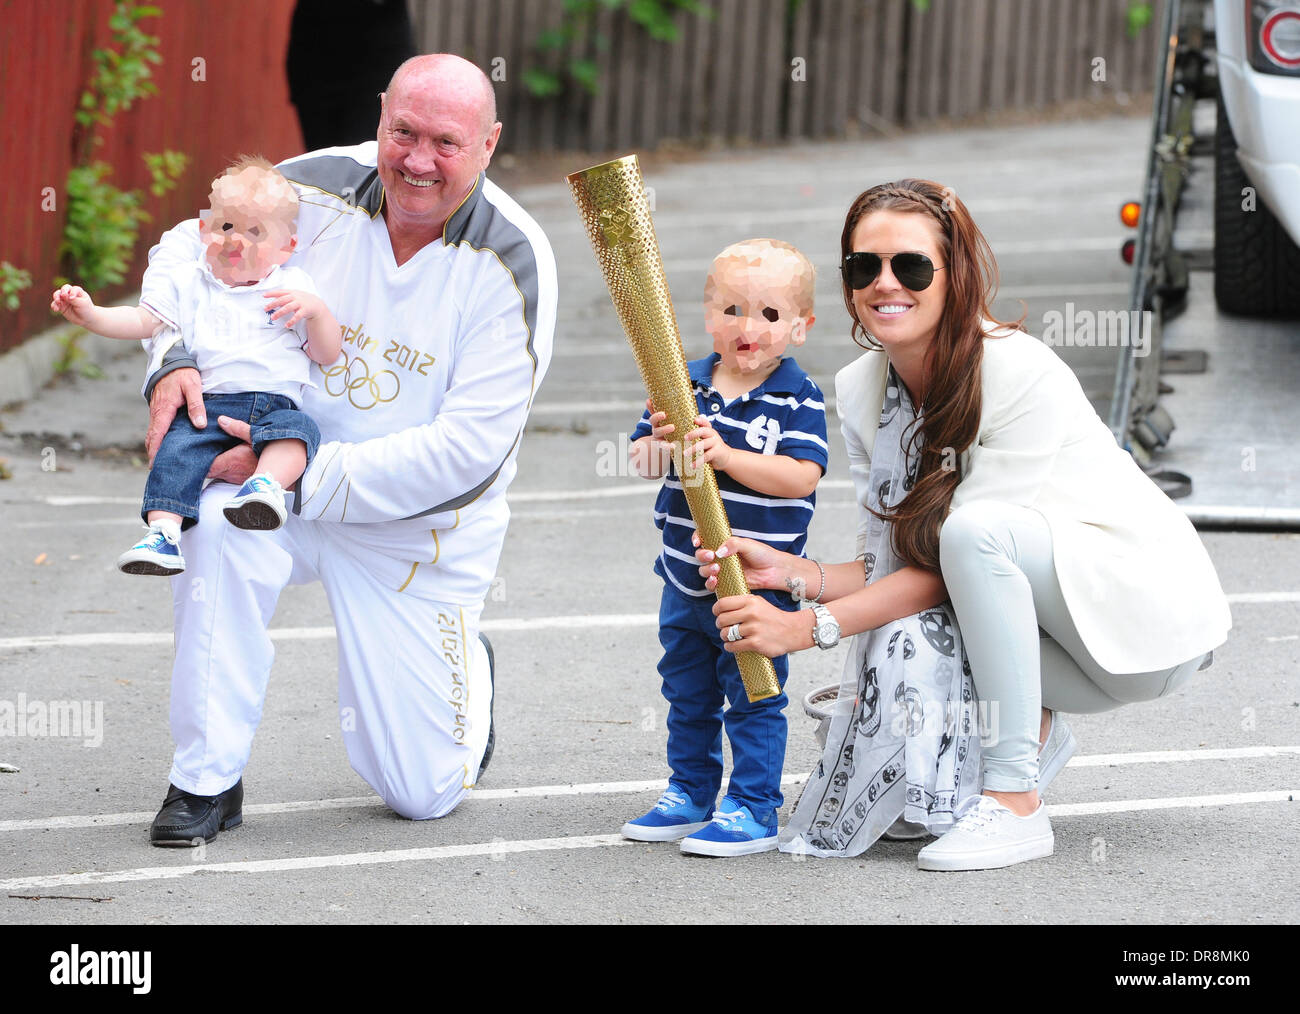 Danielle Lloyd  takes her children to a charity day at Camelot theme park, organised by the Liverpool Taxi drivers association.  Danielle was rescued at the roadside by the AA after her Range Rover broke down. She is also pictured with an Olympic torch bearer Liverpool, England - 20.06.12 Stock Photo